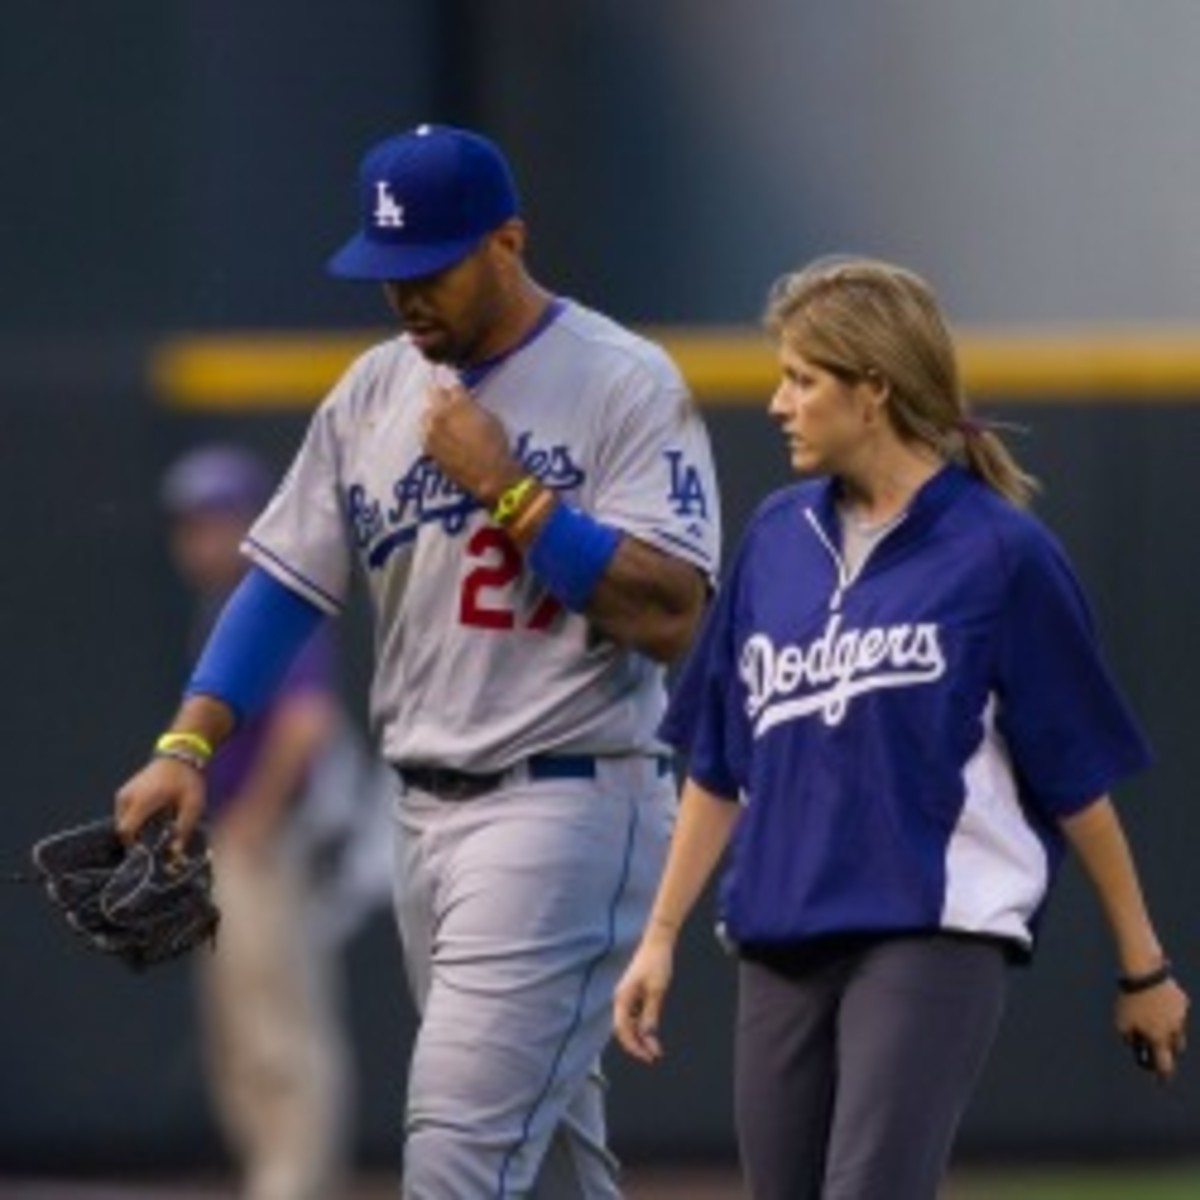 Dodgers slugger Matt Kemp hopes to be ready to play on opening day. (Justin Edmonds/Getty Images)